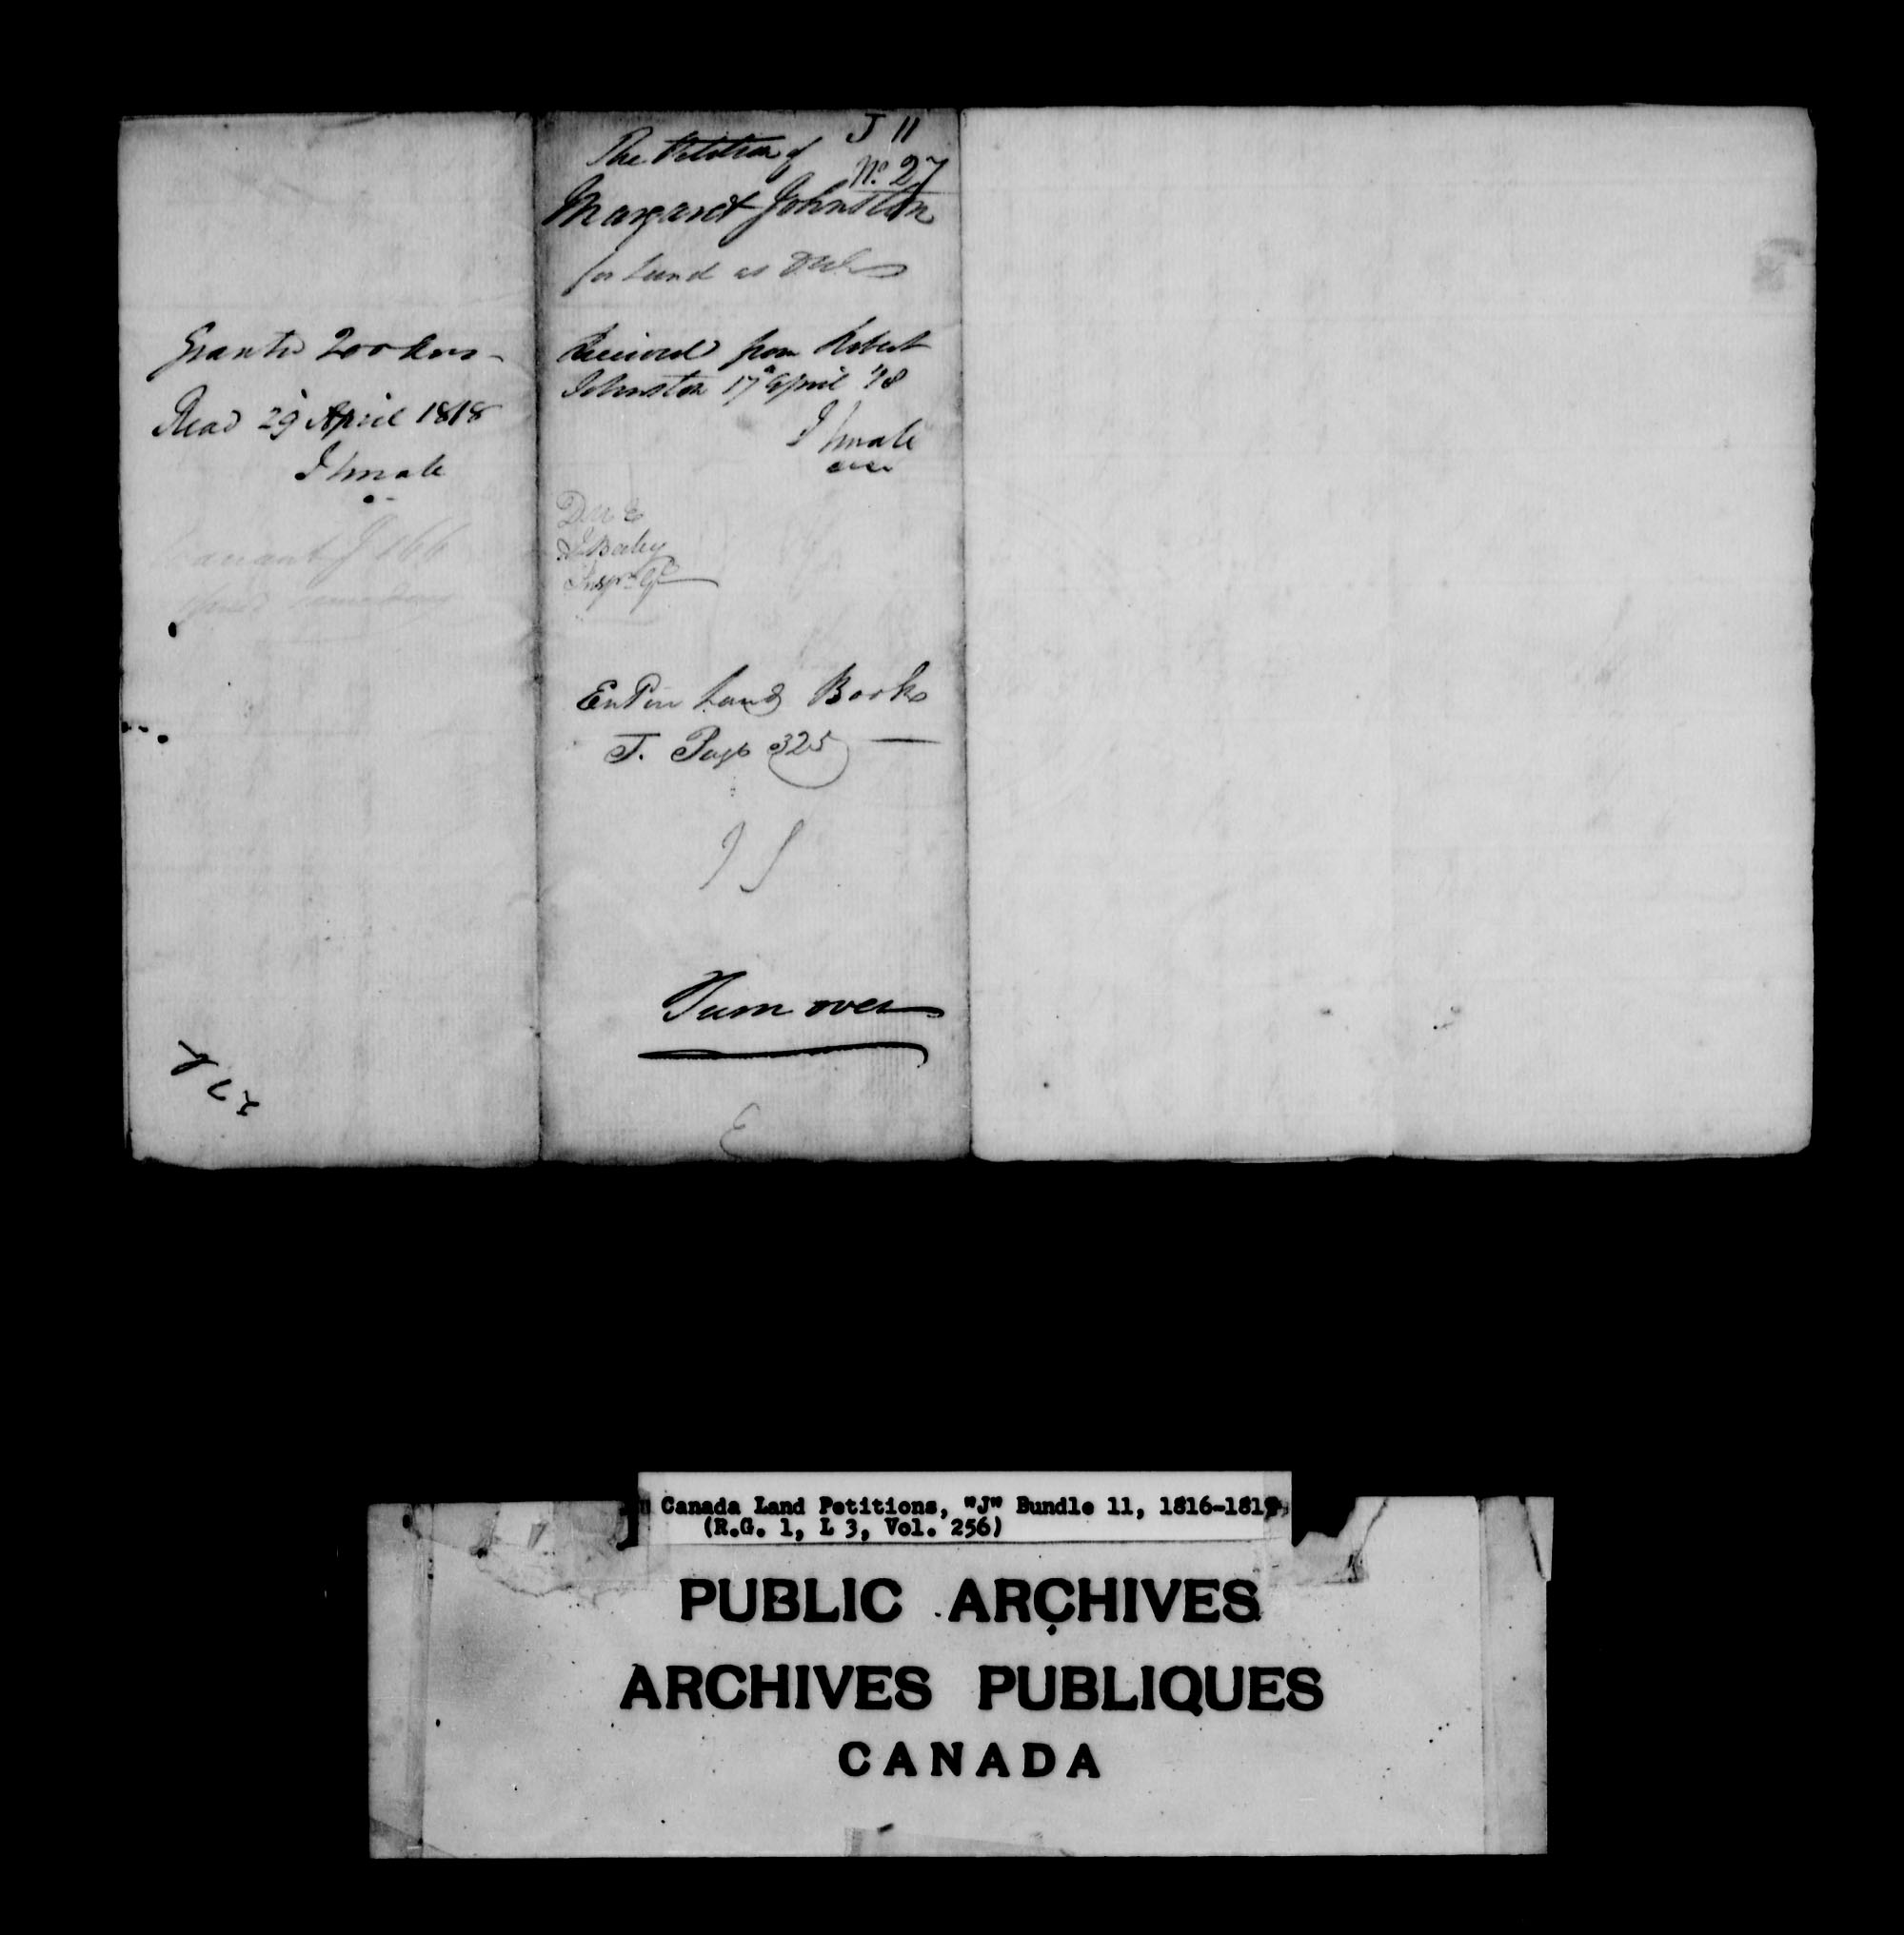 Title: Upper Canada Land Petitions (1763-1865) - Mikan Number: 205131 - Microform: c-2110